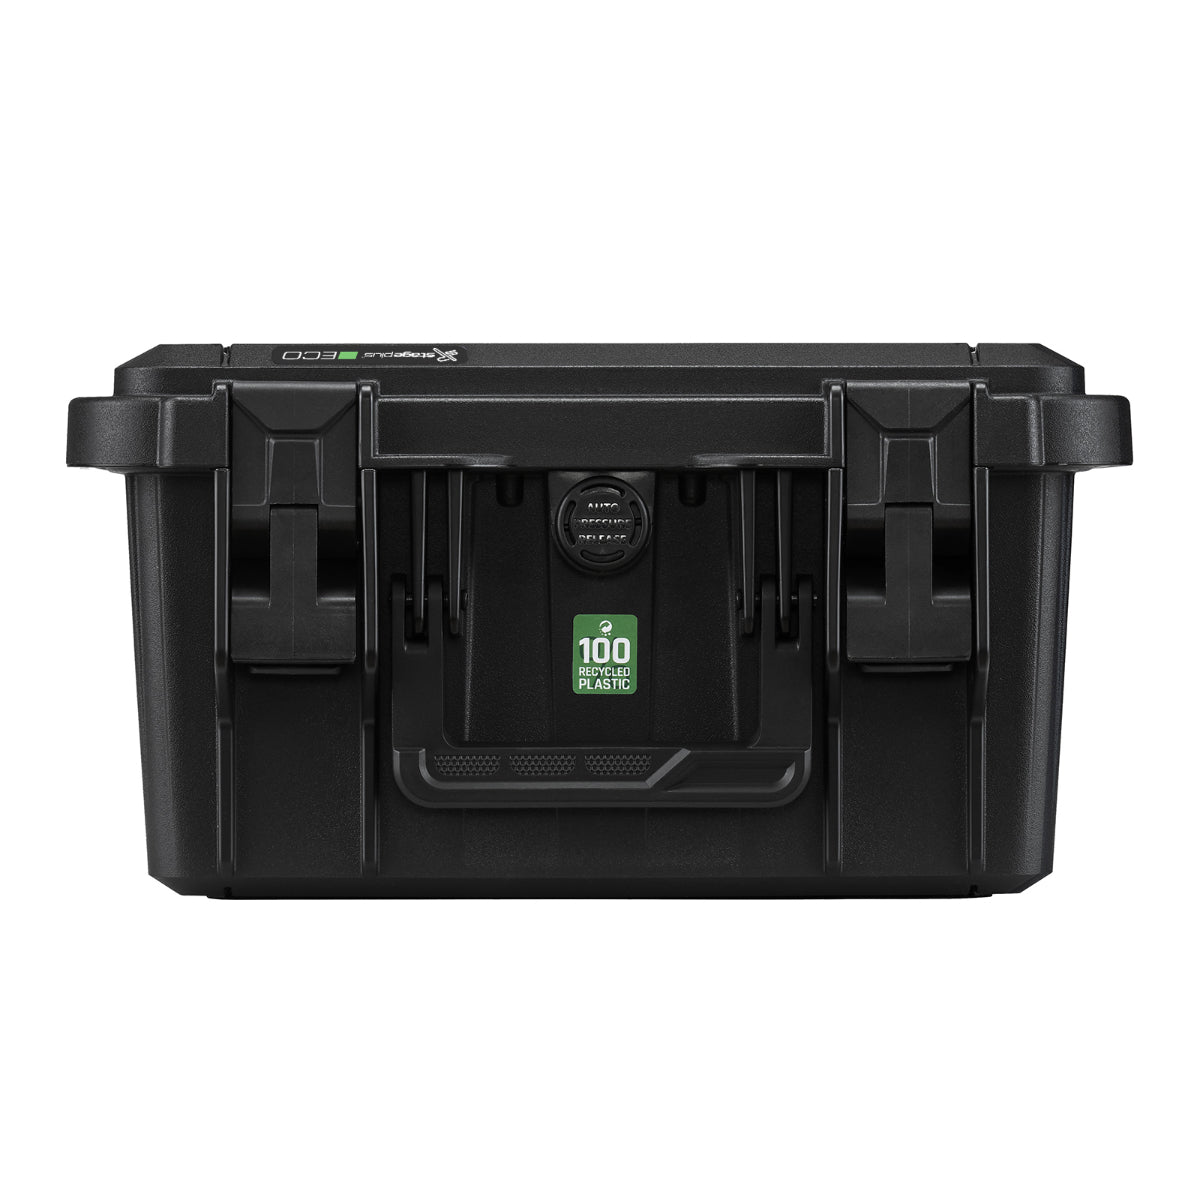 SP ECO 30DS Black Carry Case, Cubed Foam, ID: L290xW220xH160mm